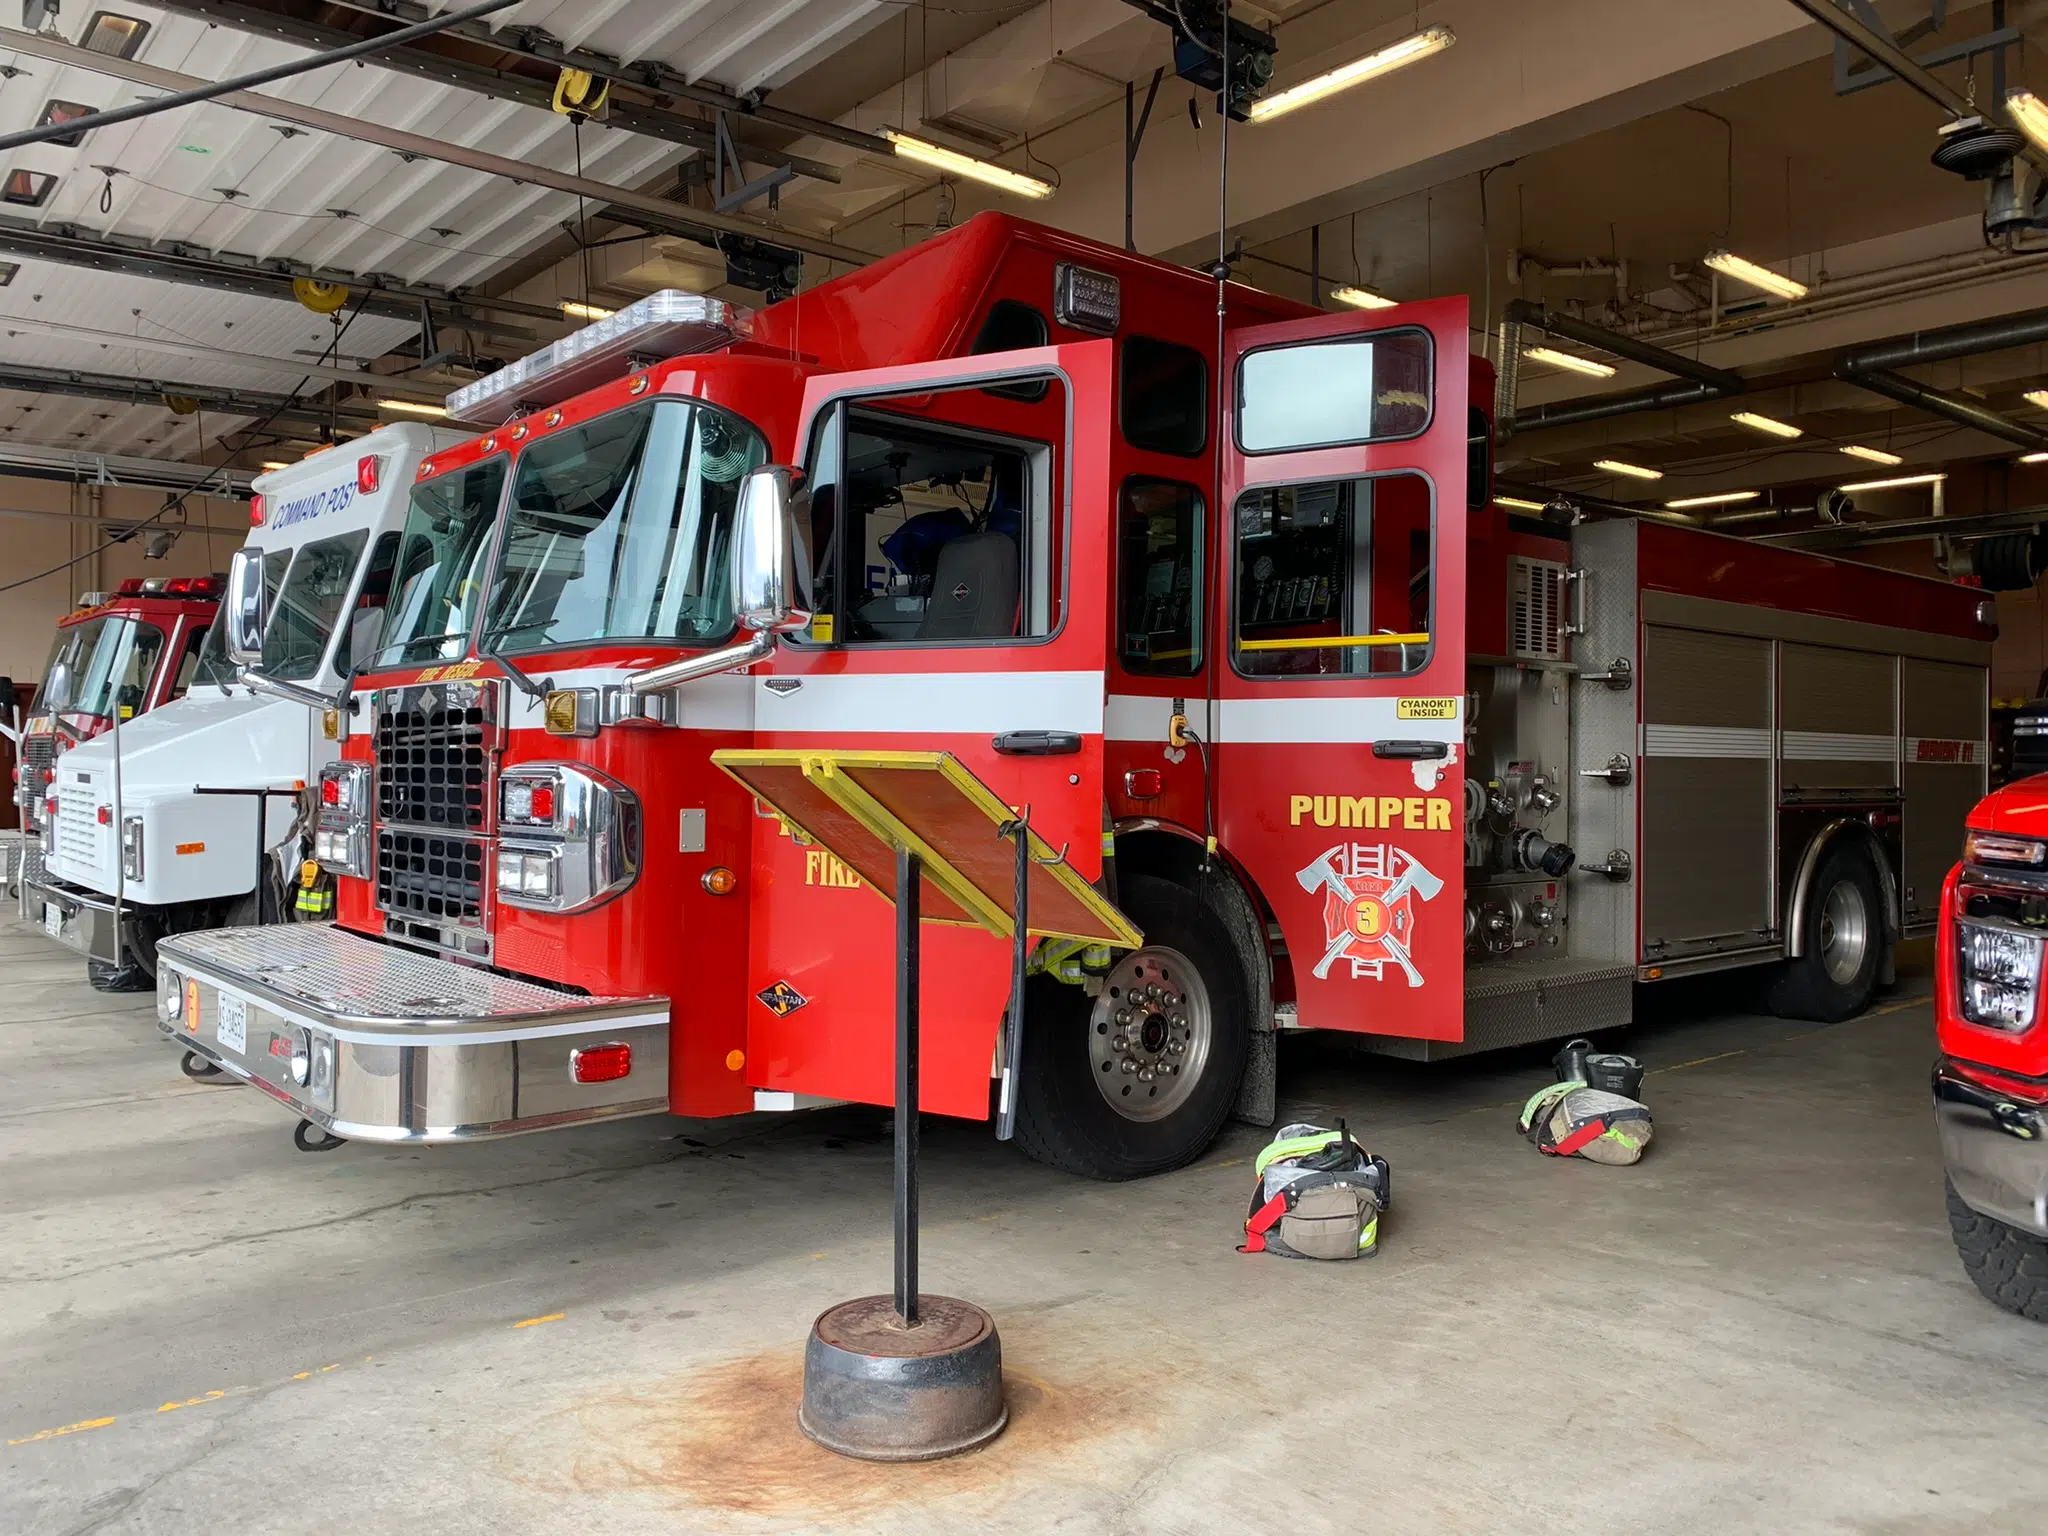 City set to receive new fire truck